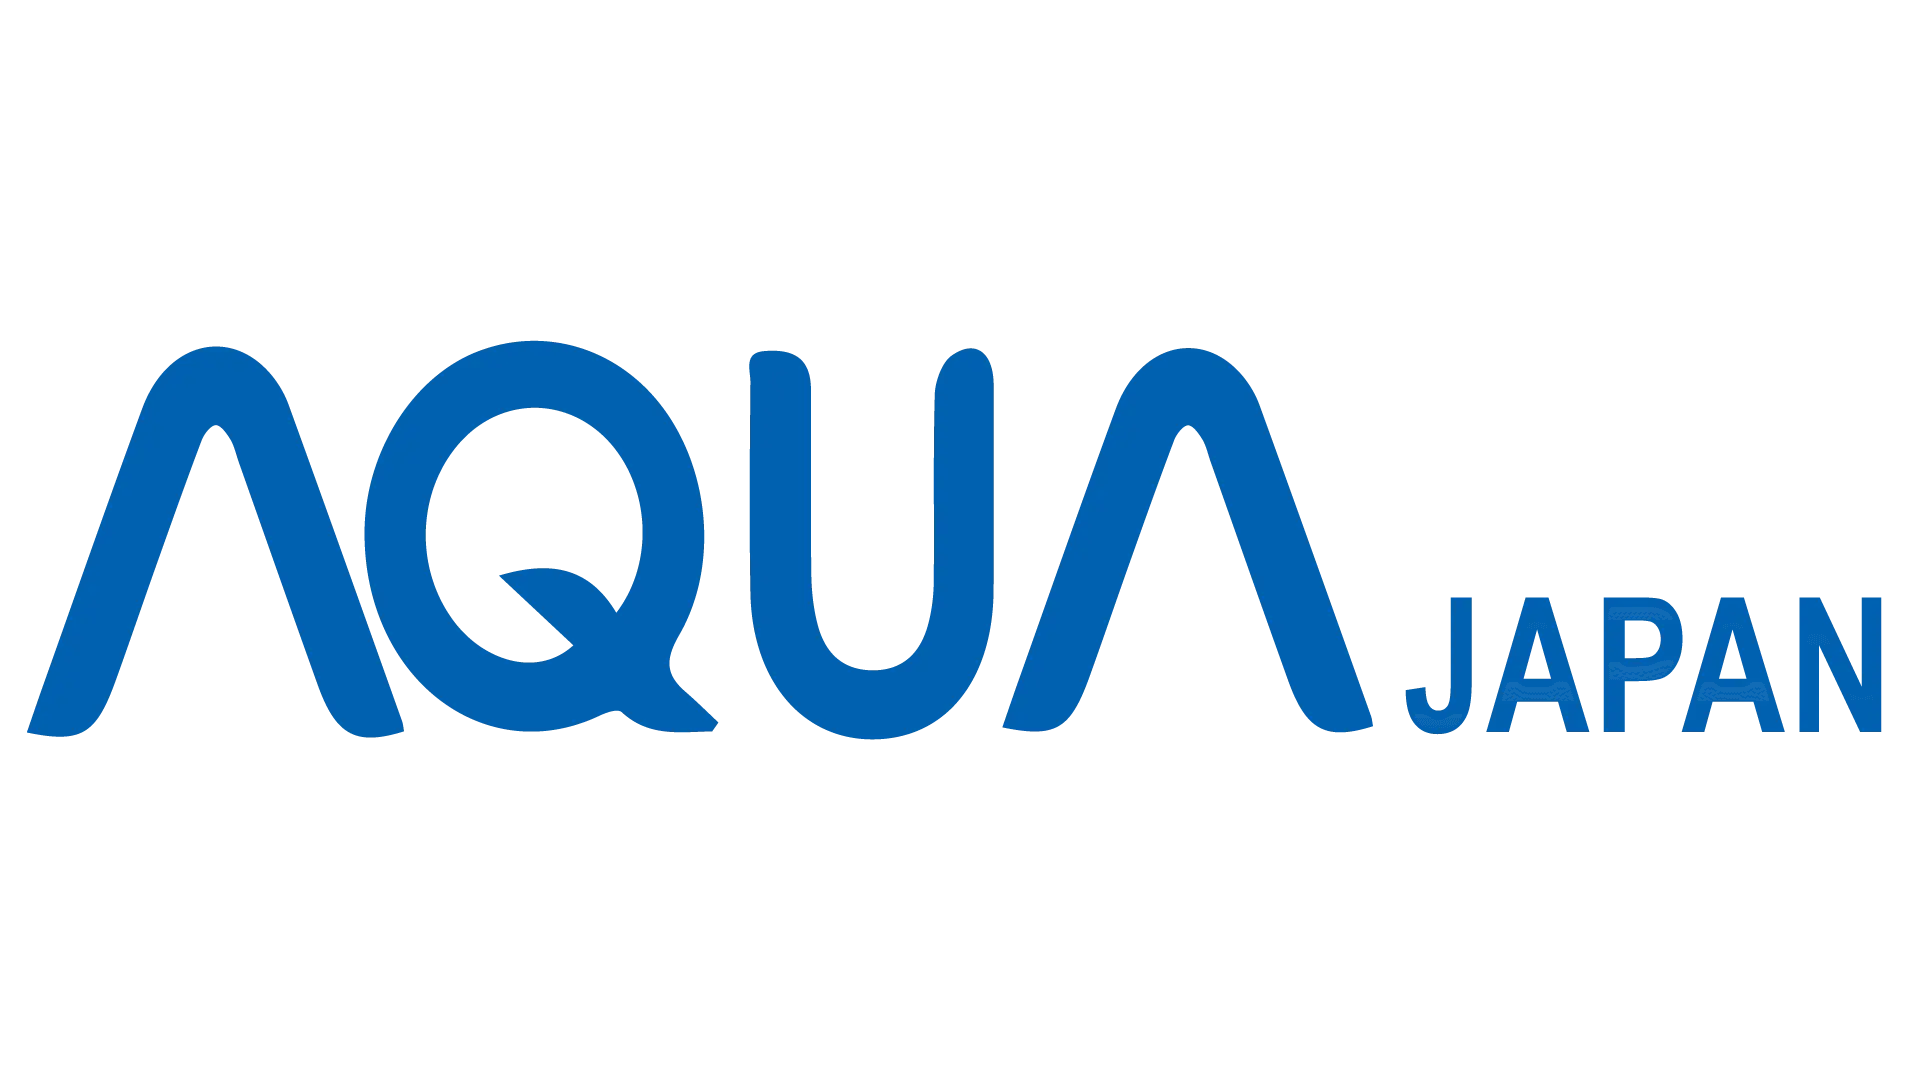 WhatsApp for electronic industry owned by Aqua Japan company